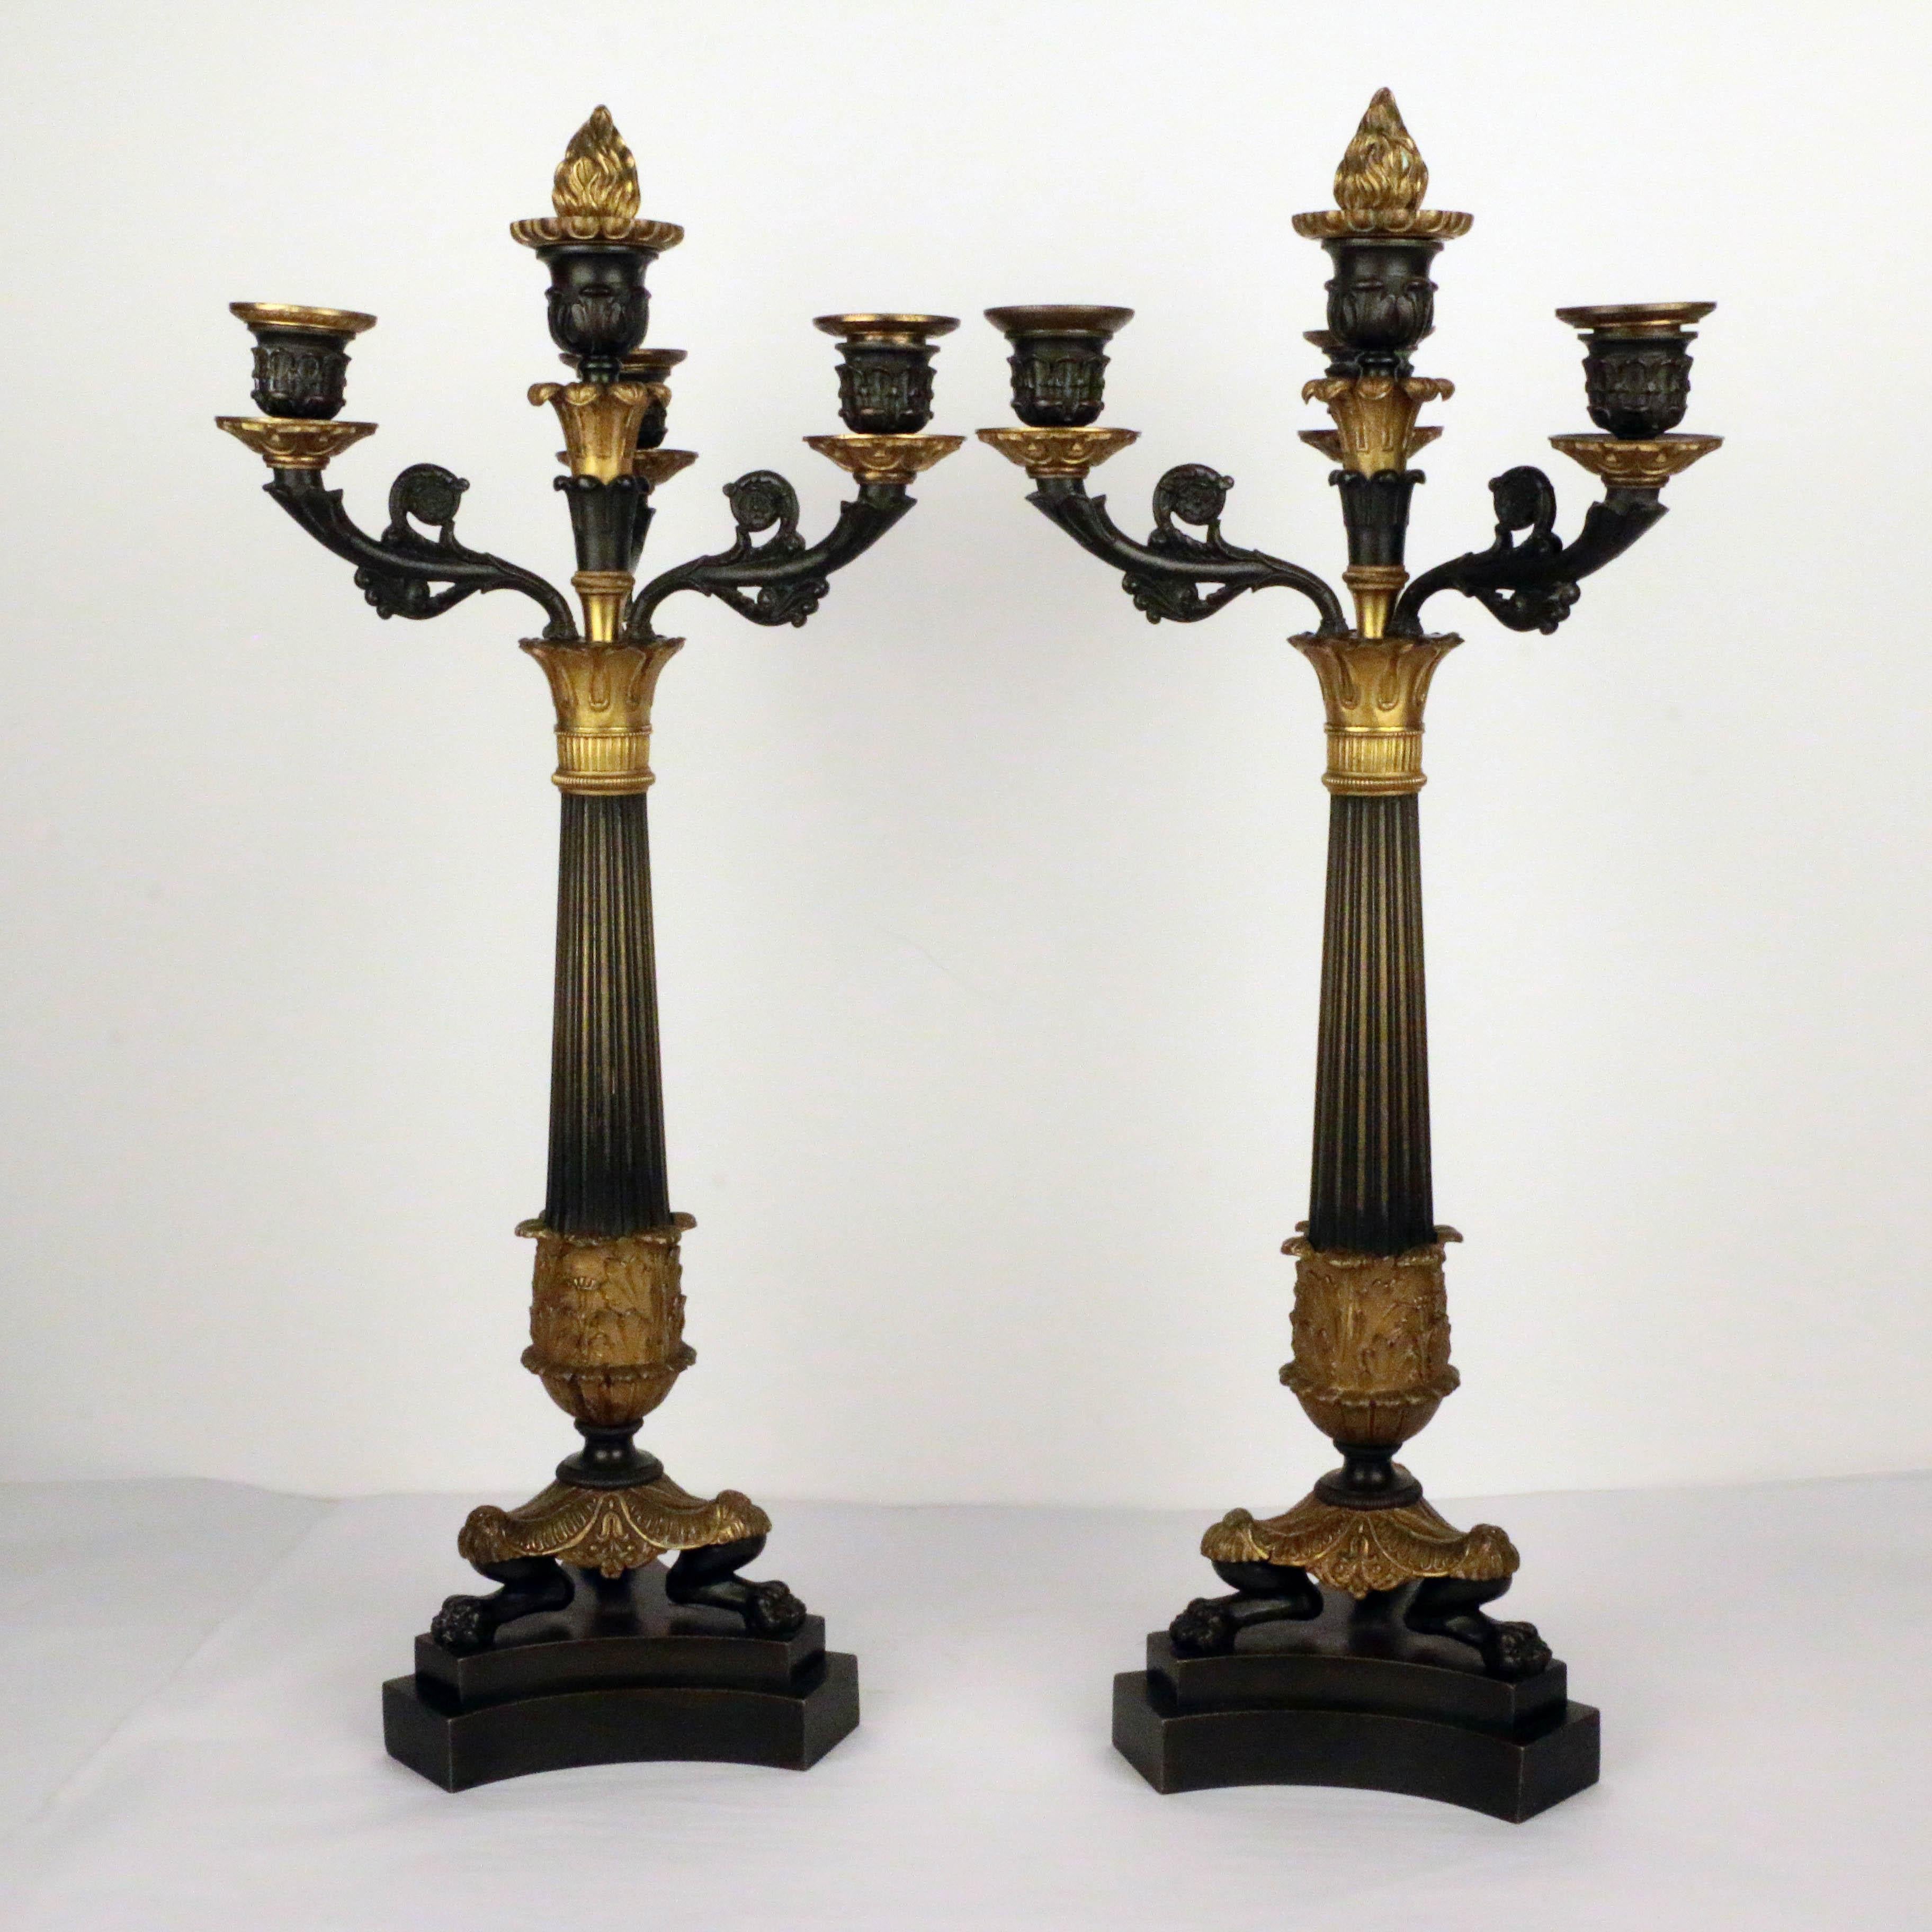 French Pair of Empire Period Four-Arm Bronze Candelabra For Sale